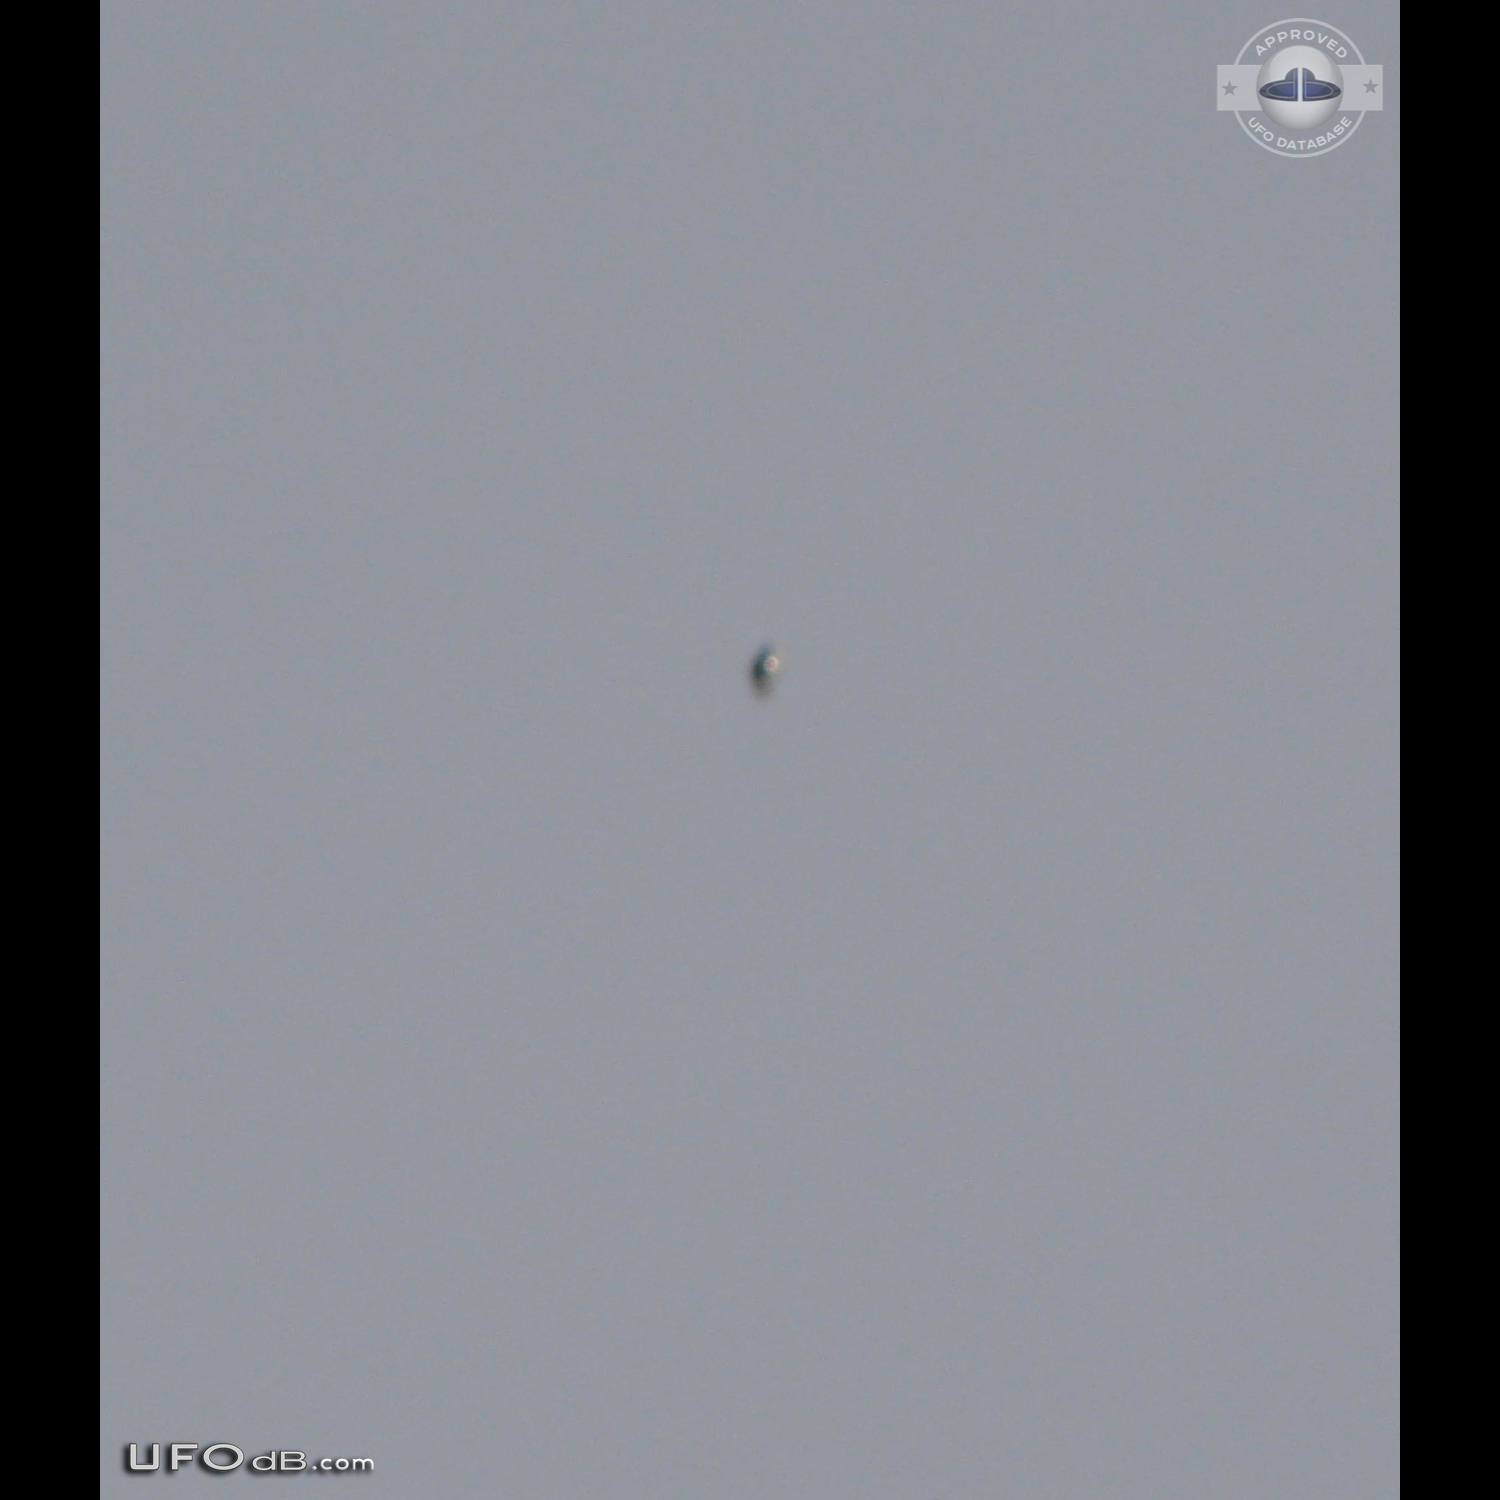 Shiny Upside-down Teardrop UFO rotating in the sky San Marcos CA USA UFO Picture #623-1